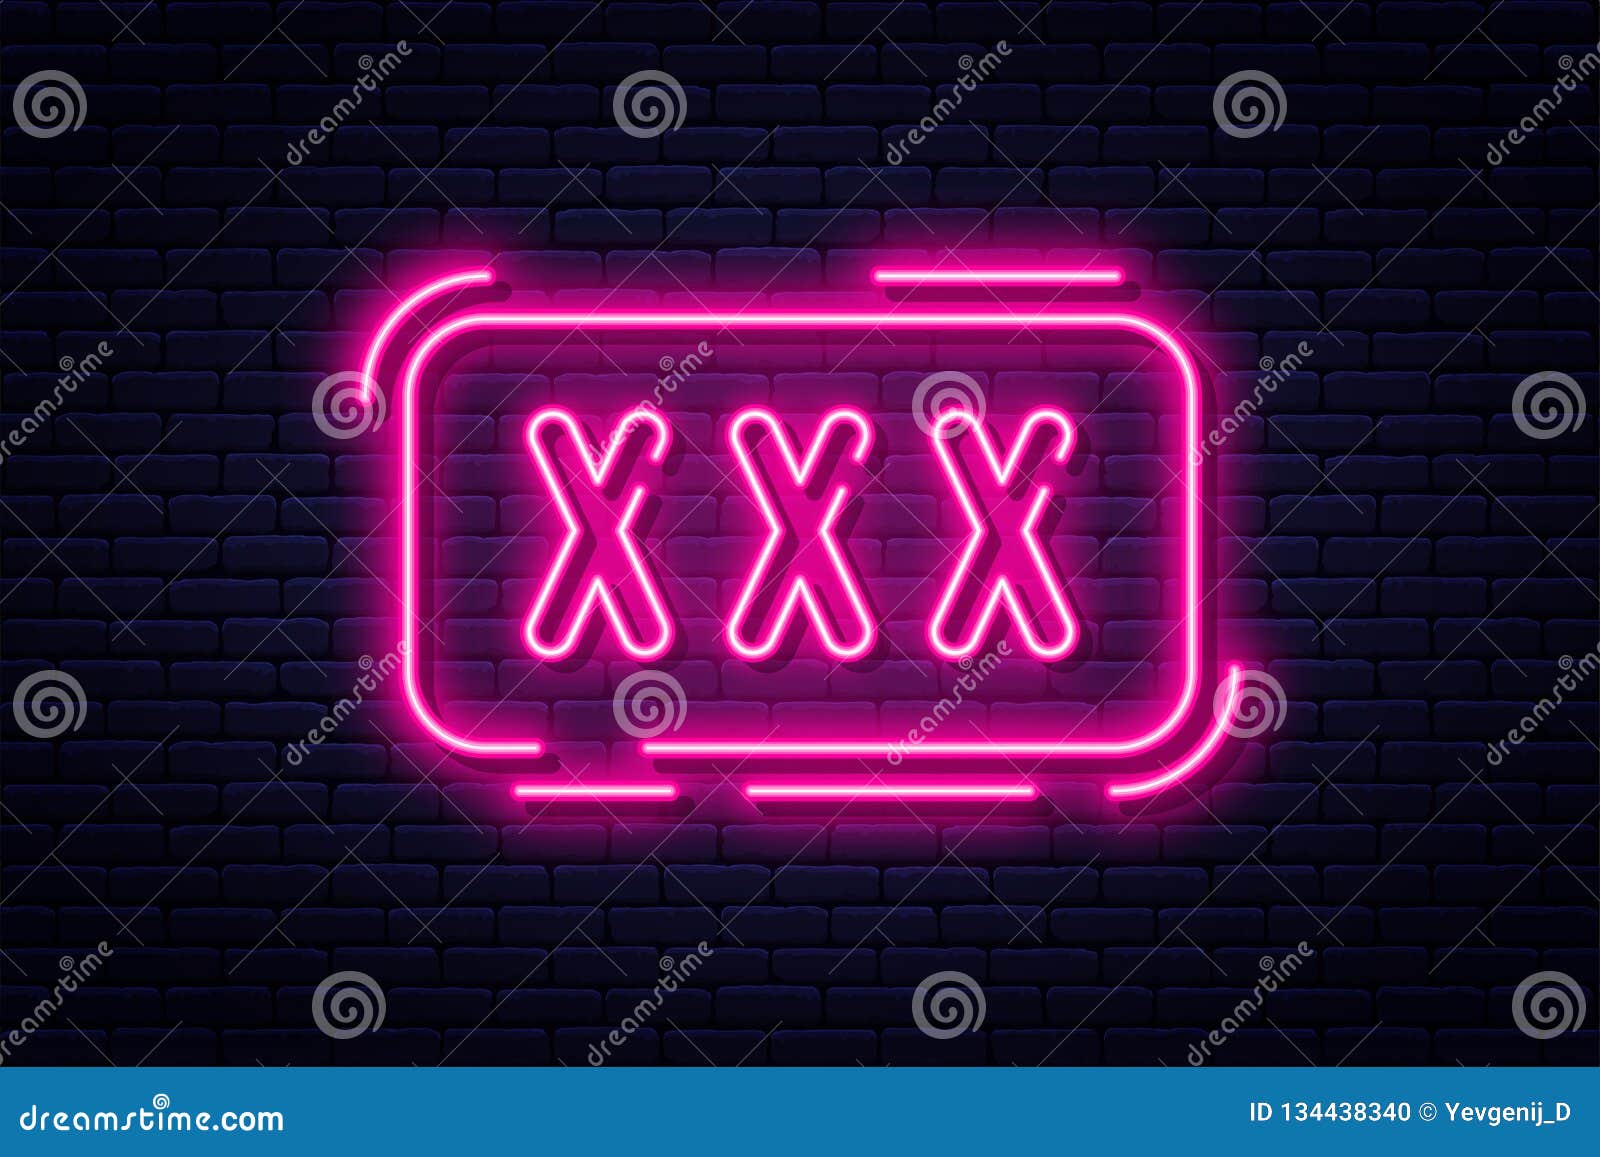 Neon Sign, Adults only, 18 Plus, Sex and Xxx. Restricted Content, Erotic  Video Concept Banner, Billboard or Signboard Stock Vector - Illustration of  illuminated, frame: 134438340